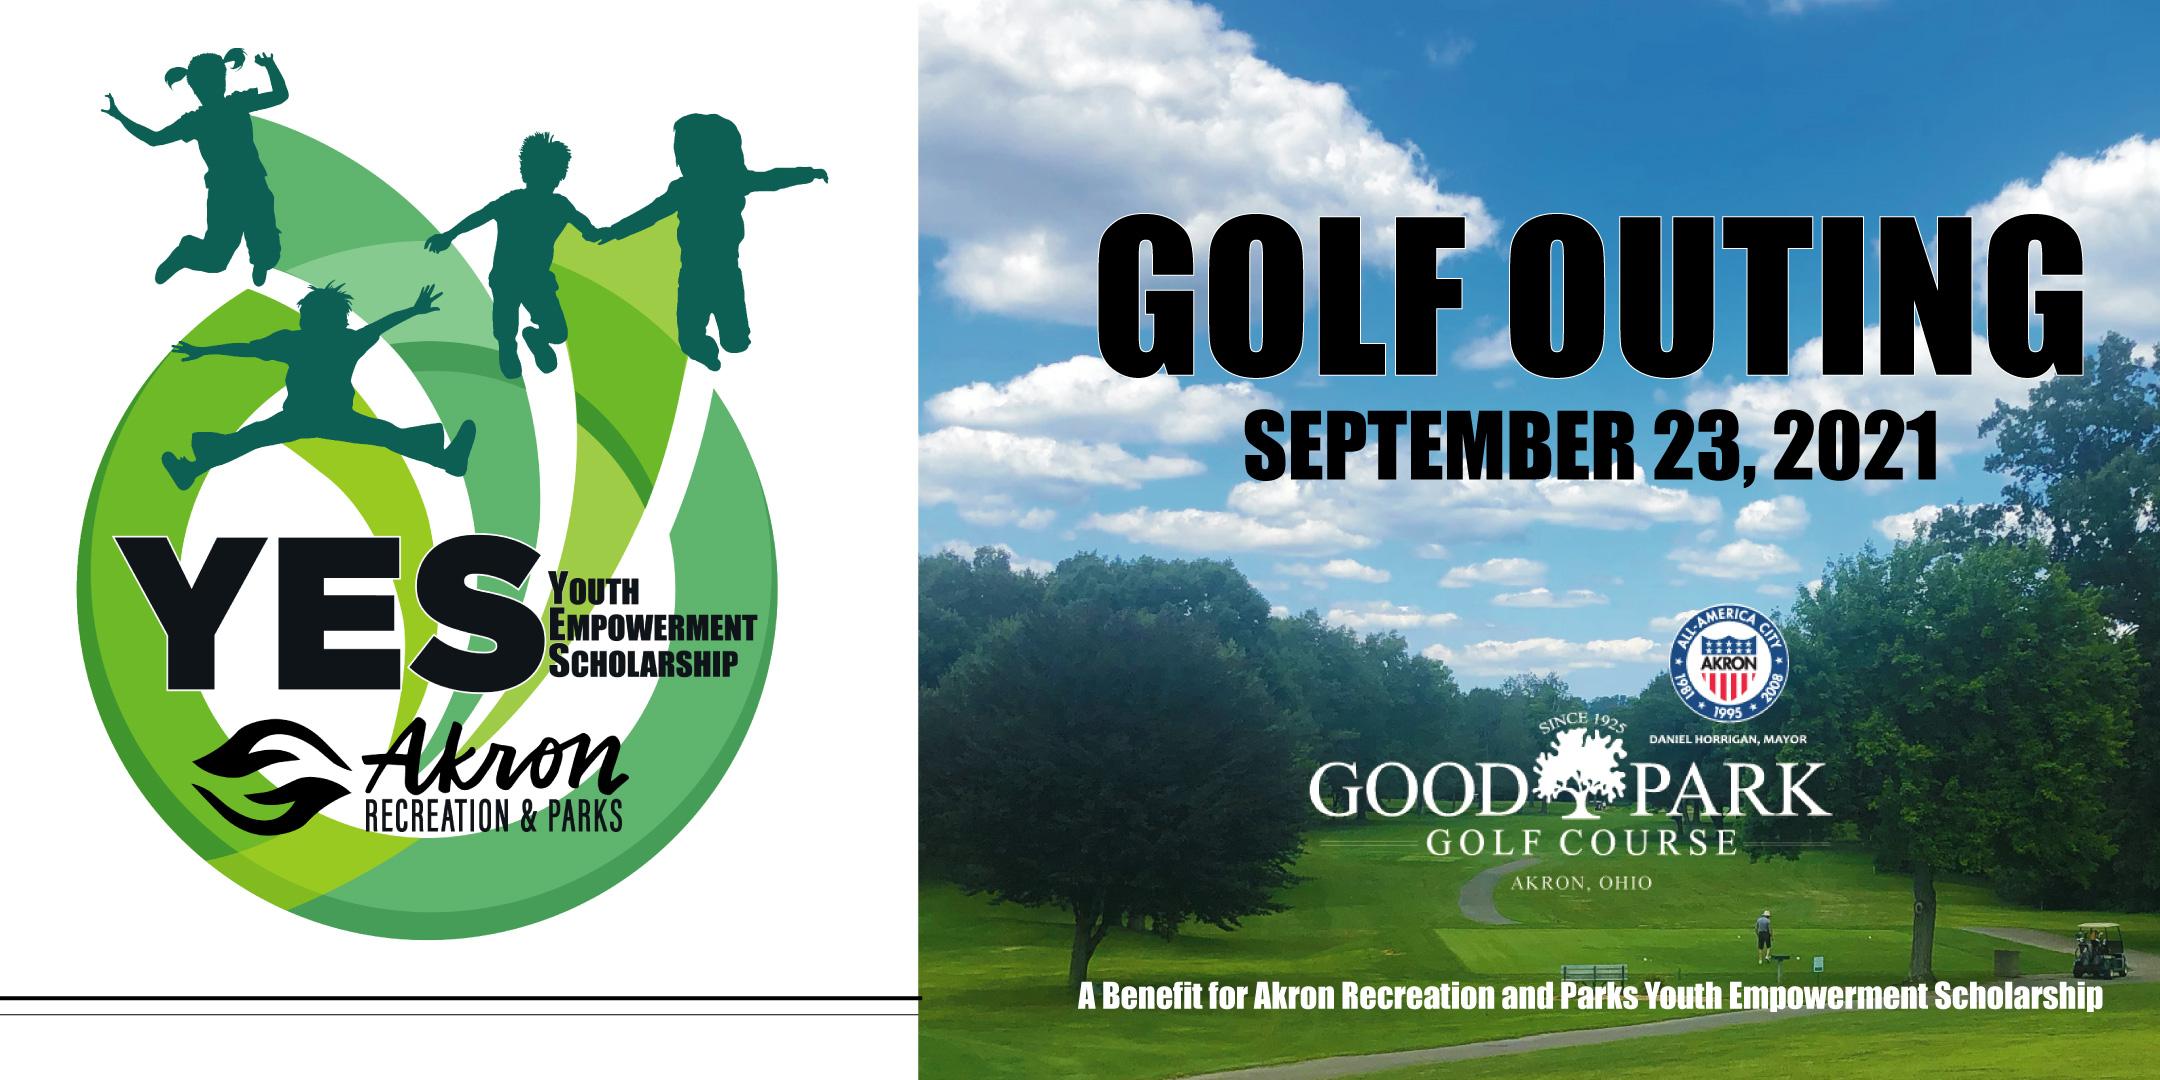 YES (Youth Empowerment Scholarship) FUND - Charity Golf Outing